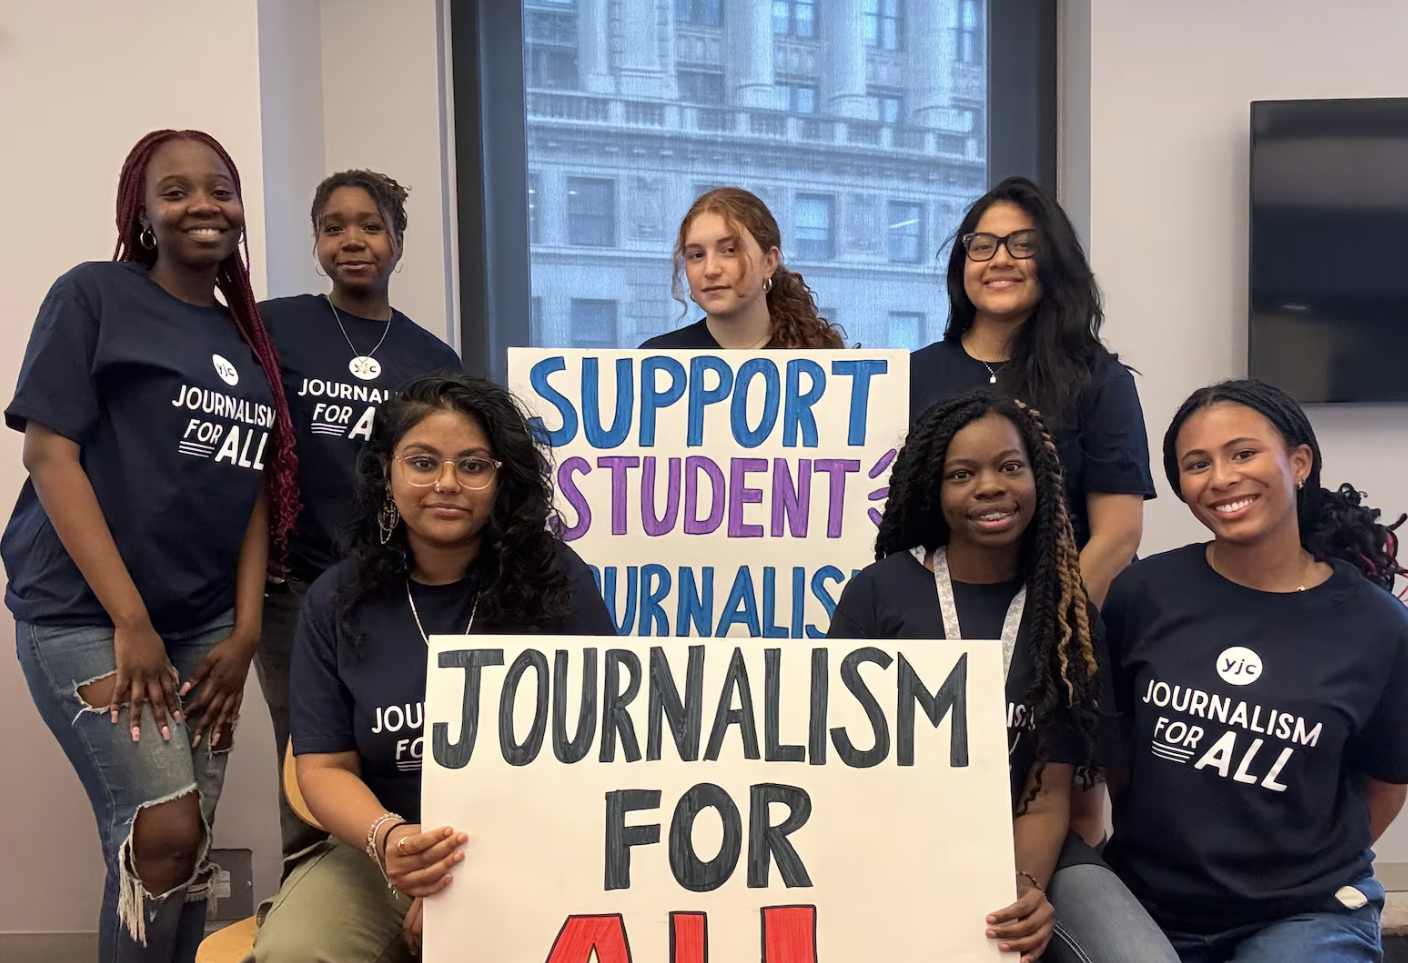 Most NYC high schools lack newspapers. A new journalism curriculum could help change that.